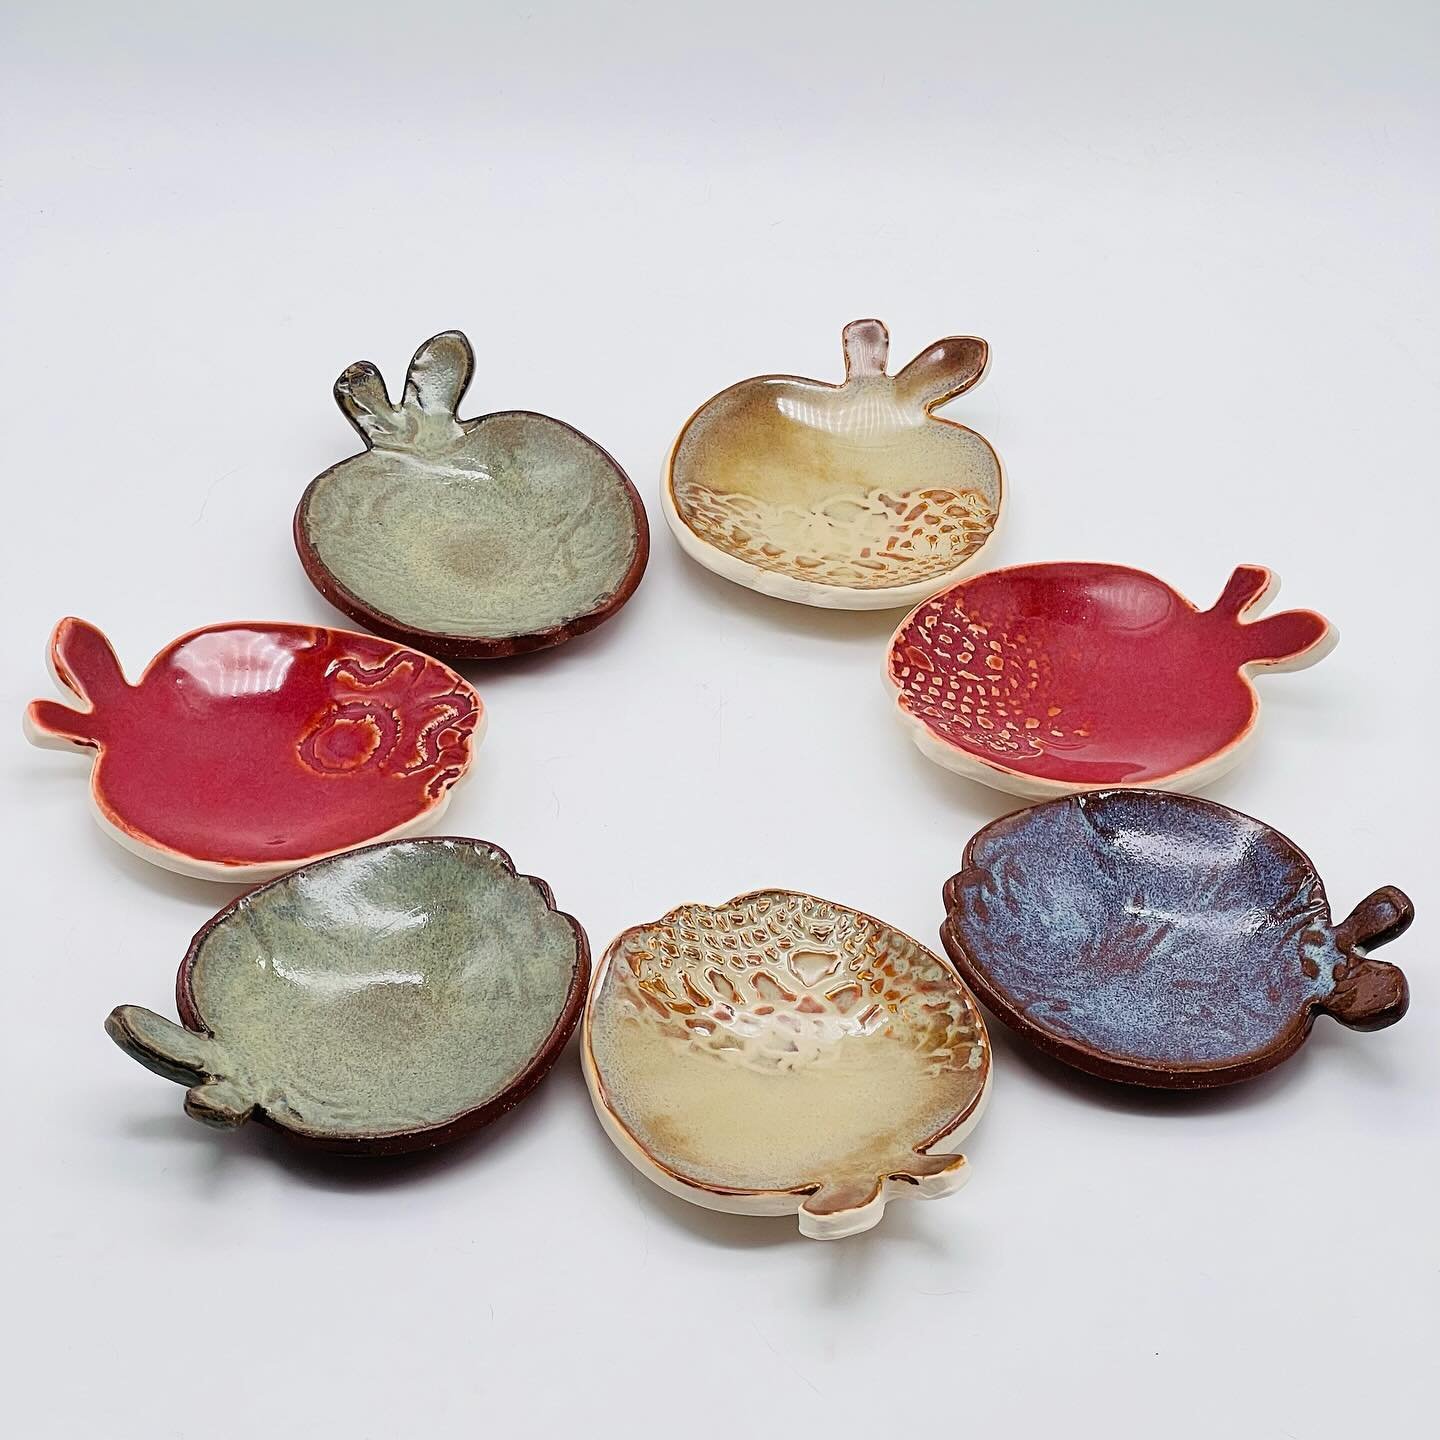 How about them apples? 😍🥰❤️
.
.
.
#ceramicdishes #ceramicapple #appledishes #apples #spoonholder #spoonholder #teabagdish #teabagholder #teabagholders #tinydishes #smalldish #smallplates #tinyplates